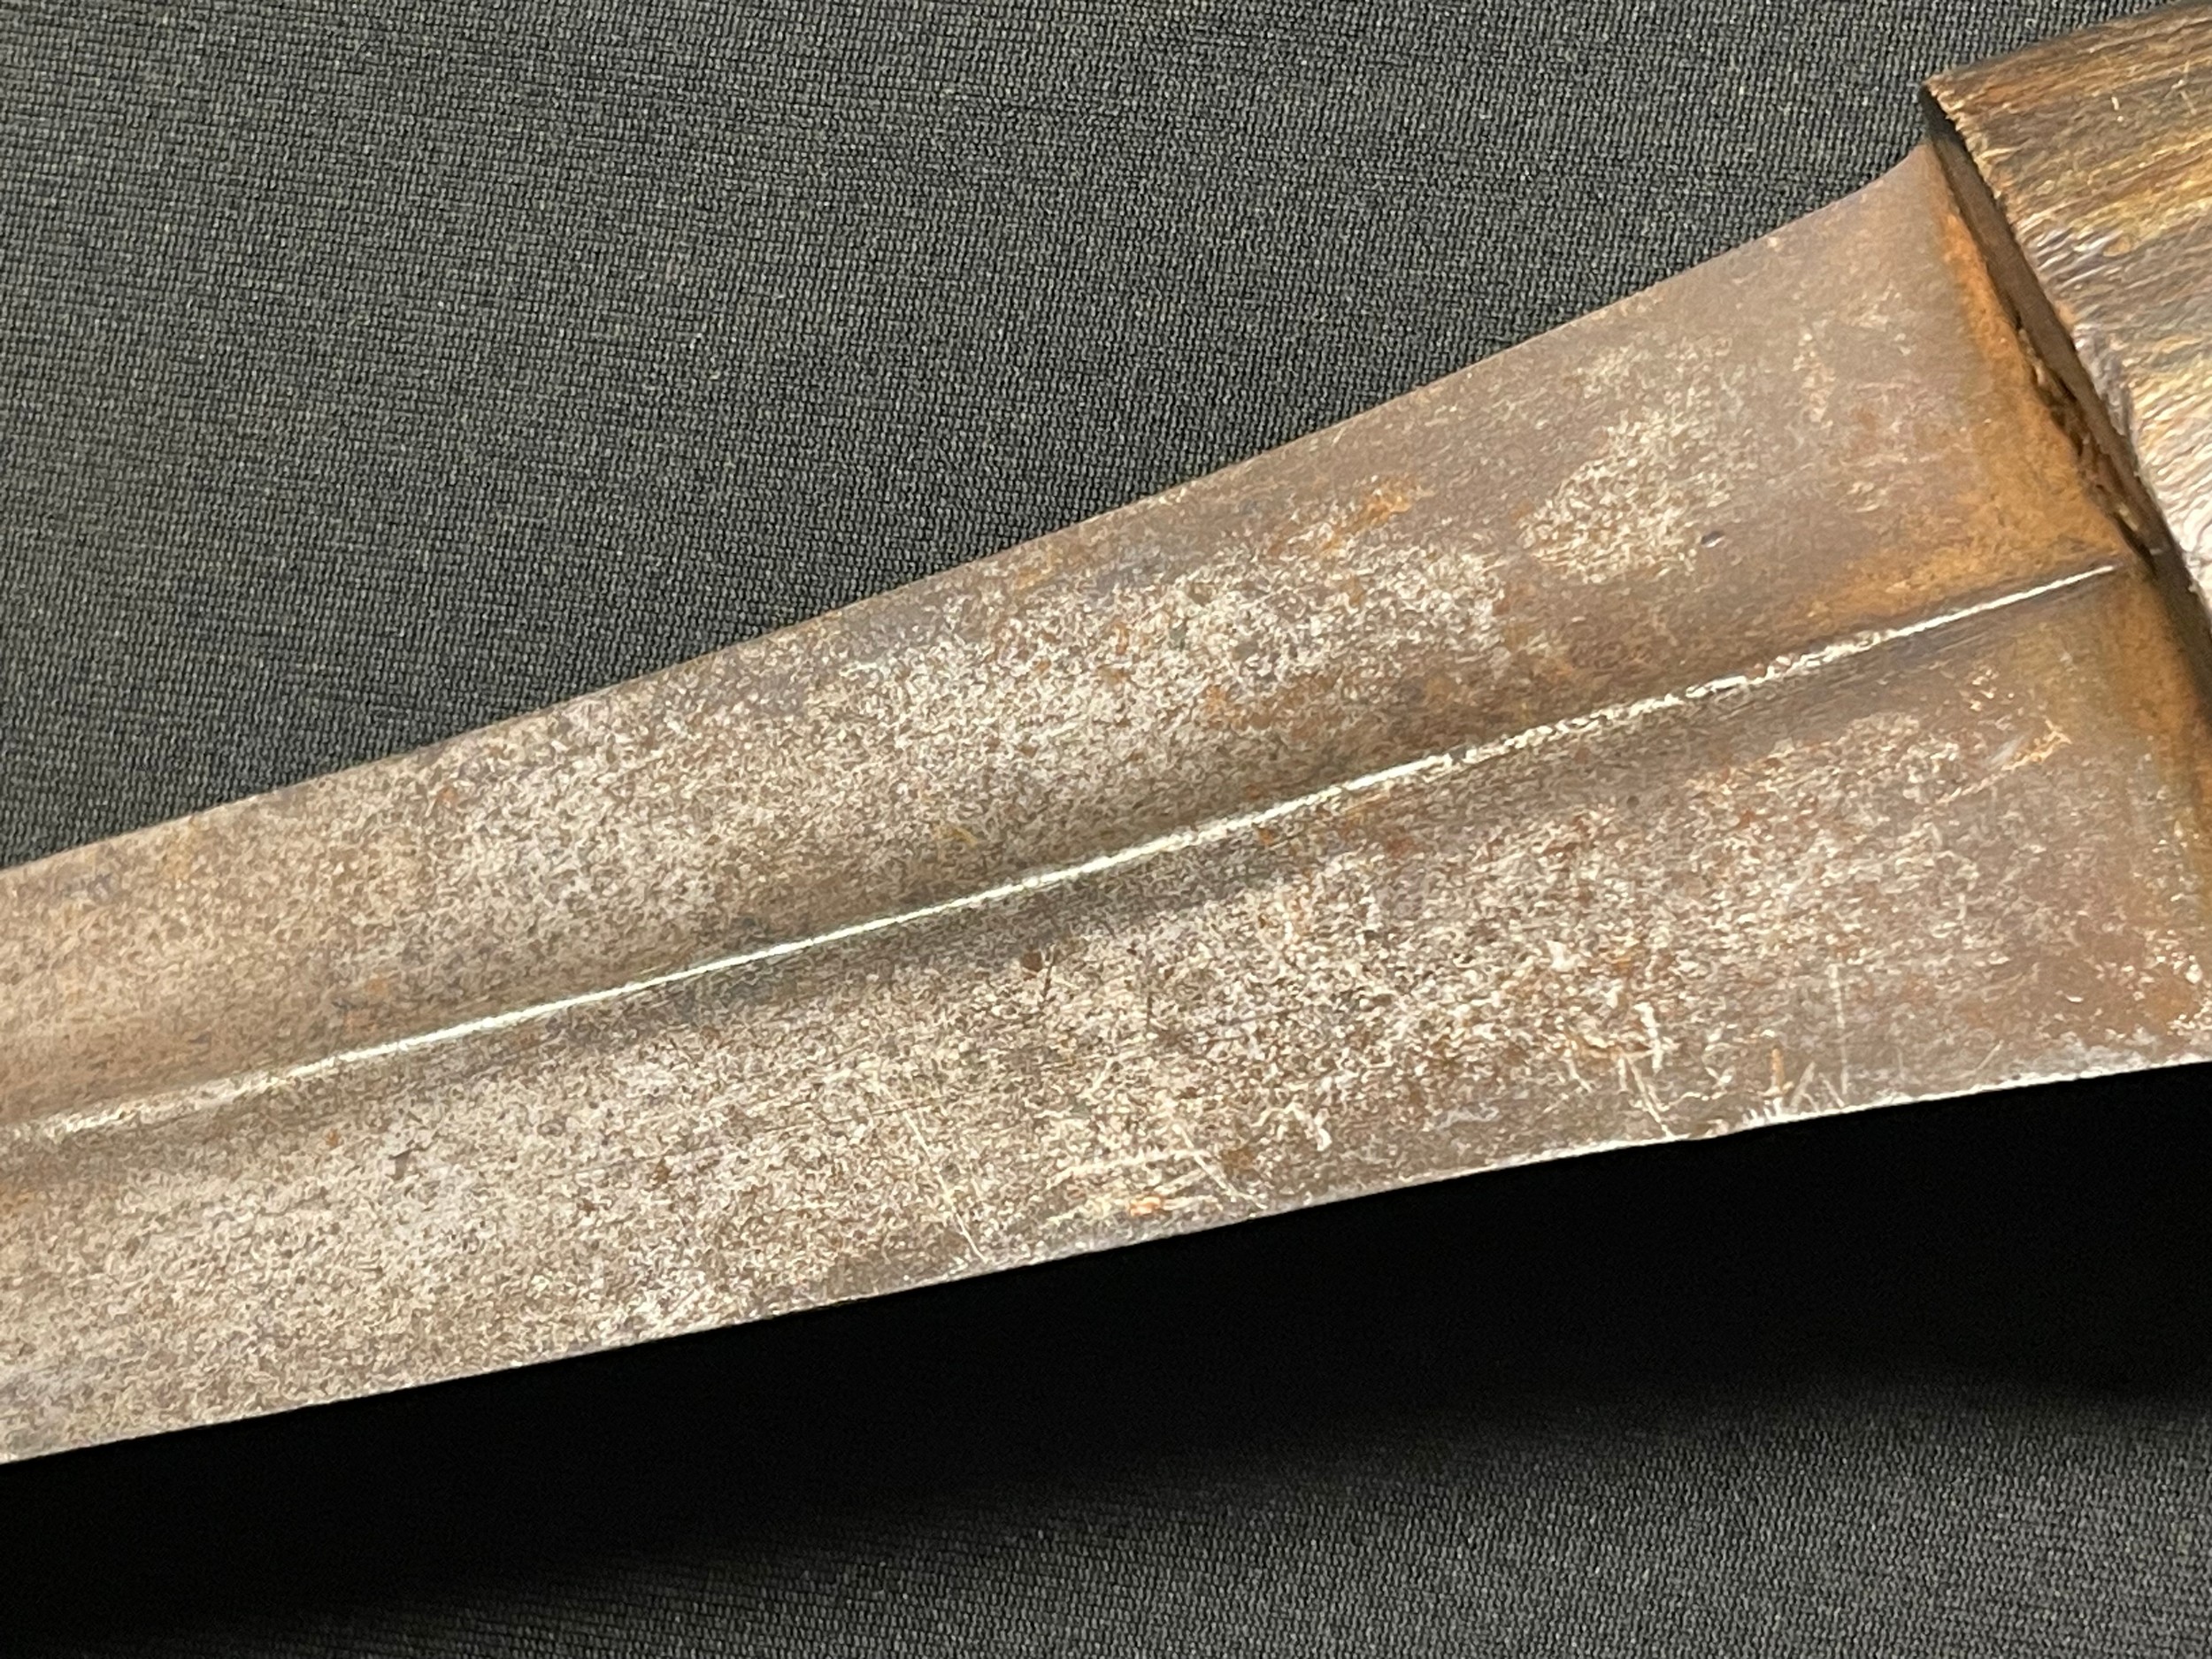 A Middle Eastern kindjal dagger, 24cm curved blade with central ridge, horn handle, 39cm long - Image 11 of 17